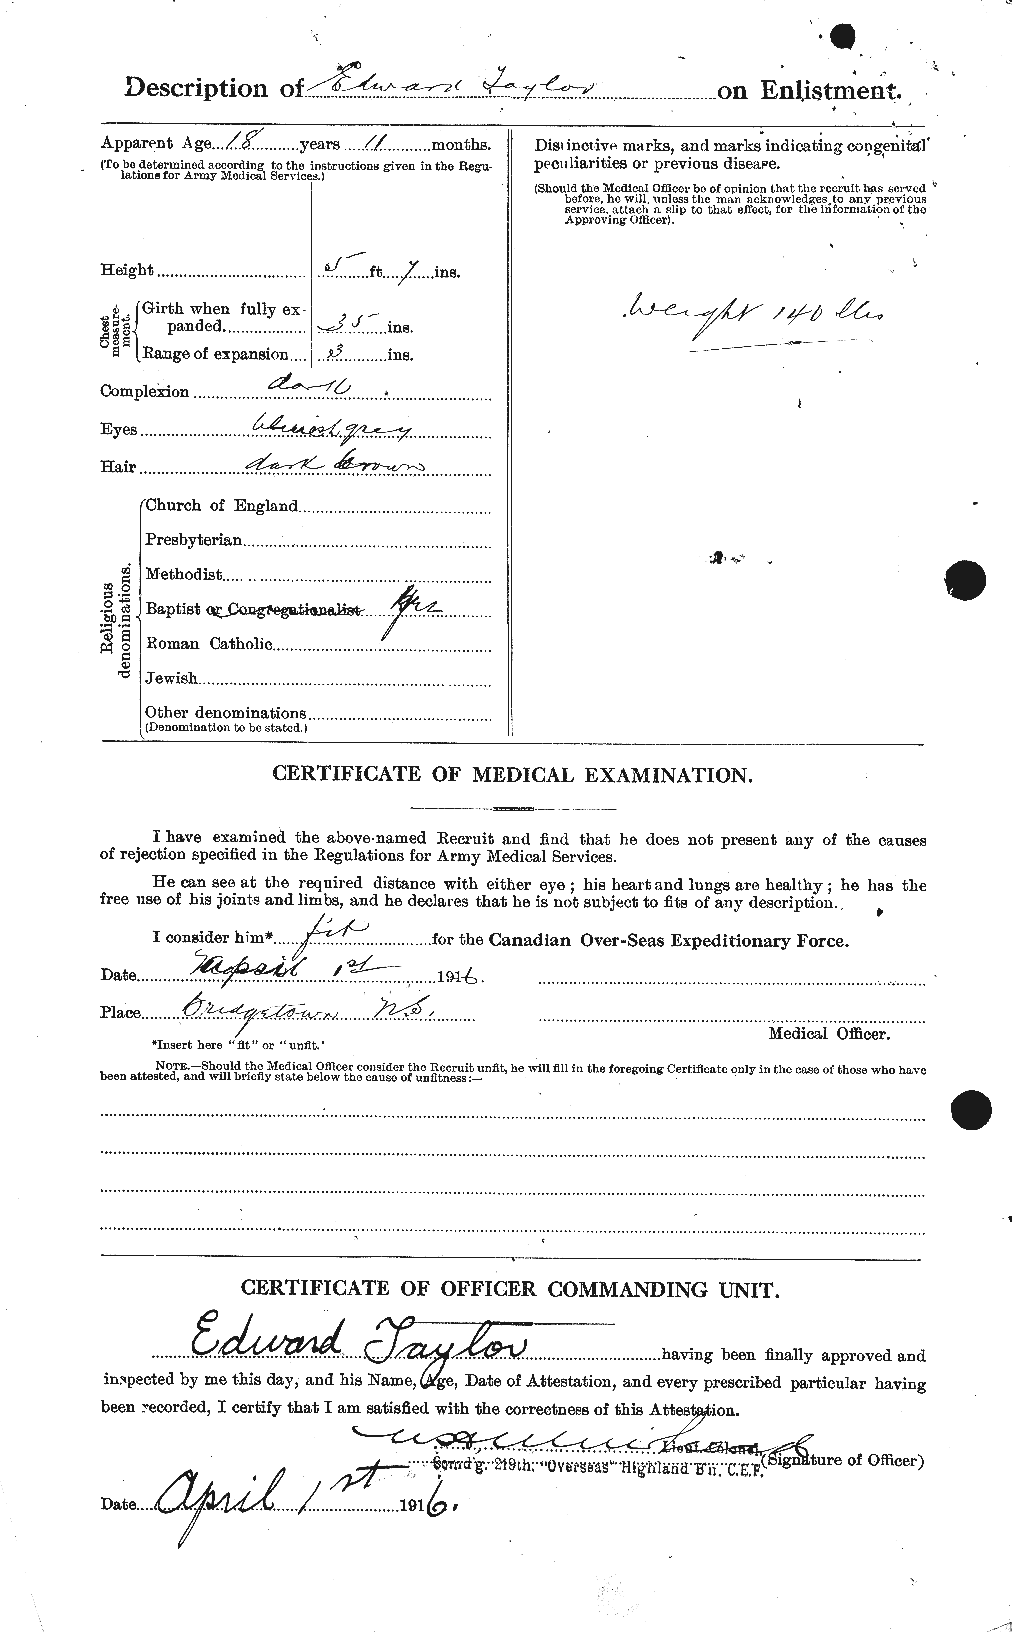 Personnel Records of the First World War - CEF 627290b